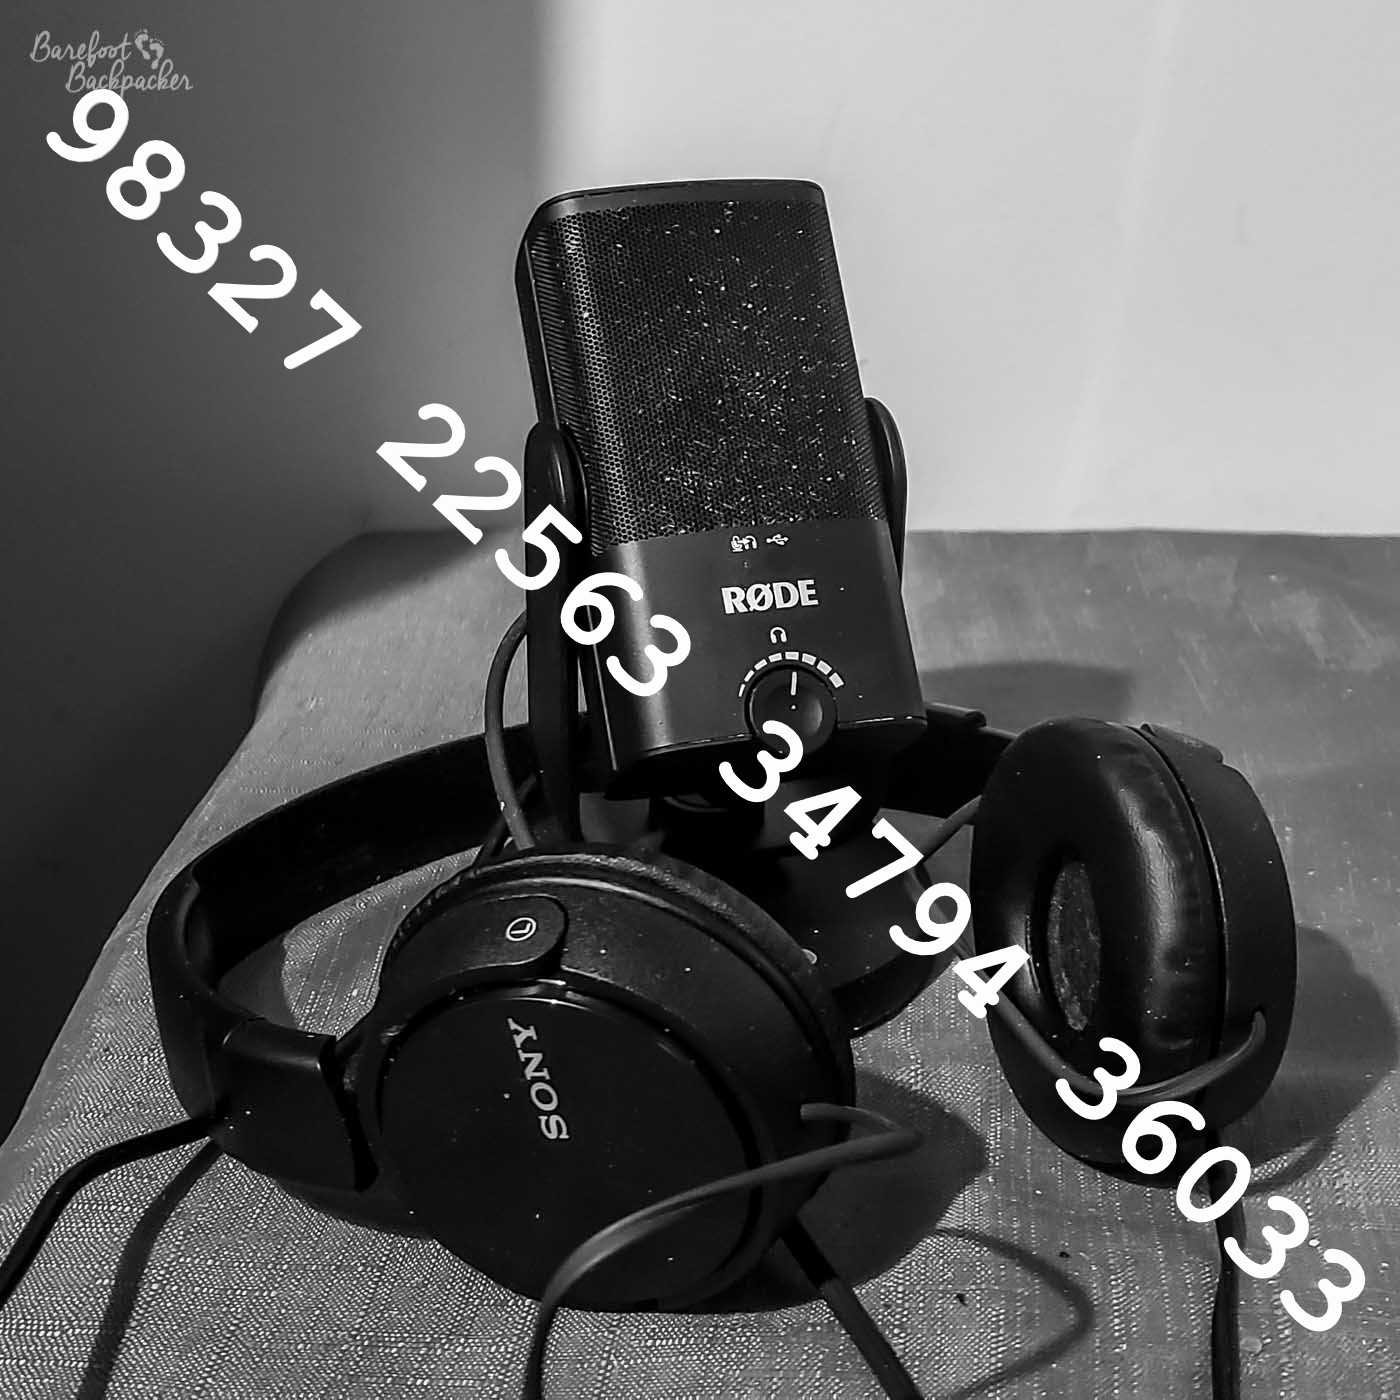 Image of a microphone and headphones on a desk, with the numbers 98327 22563 34794 36033 overprinted.